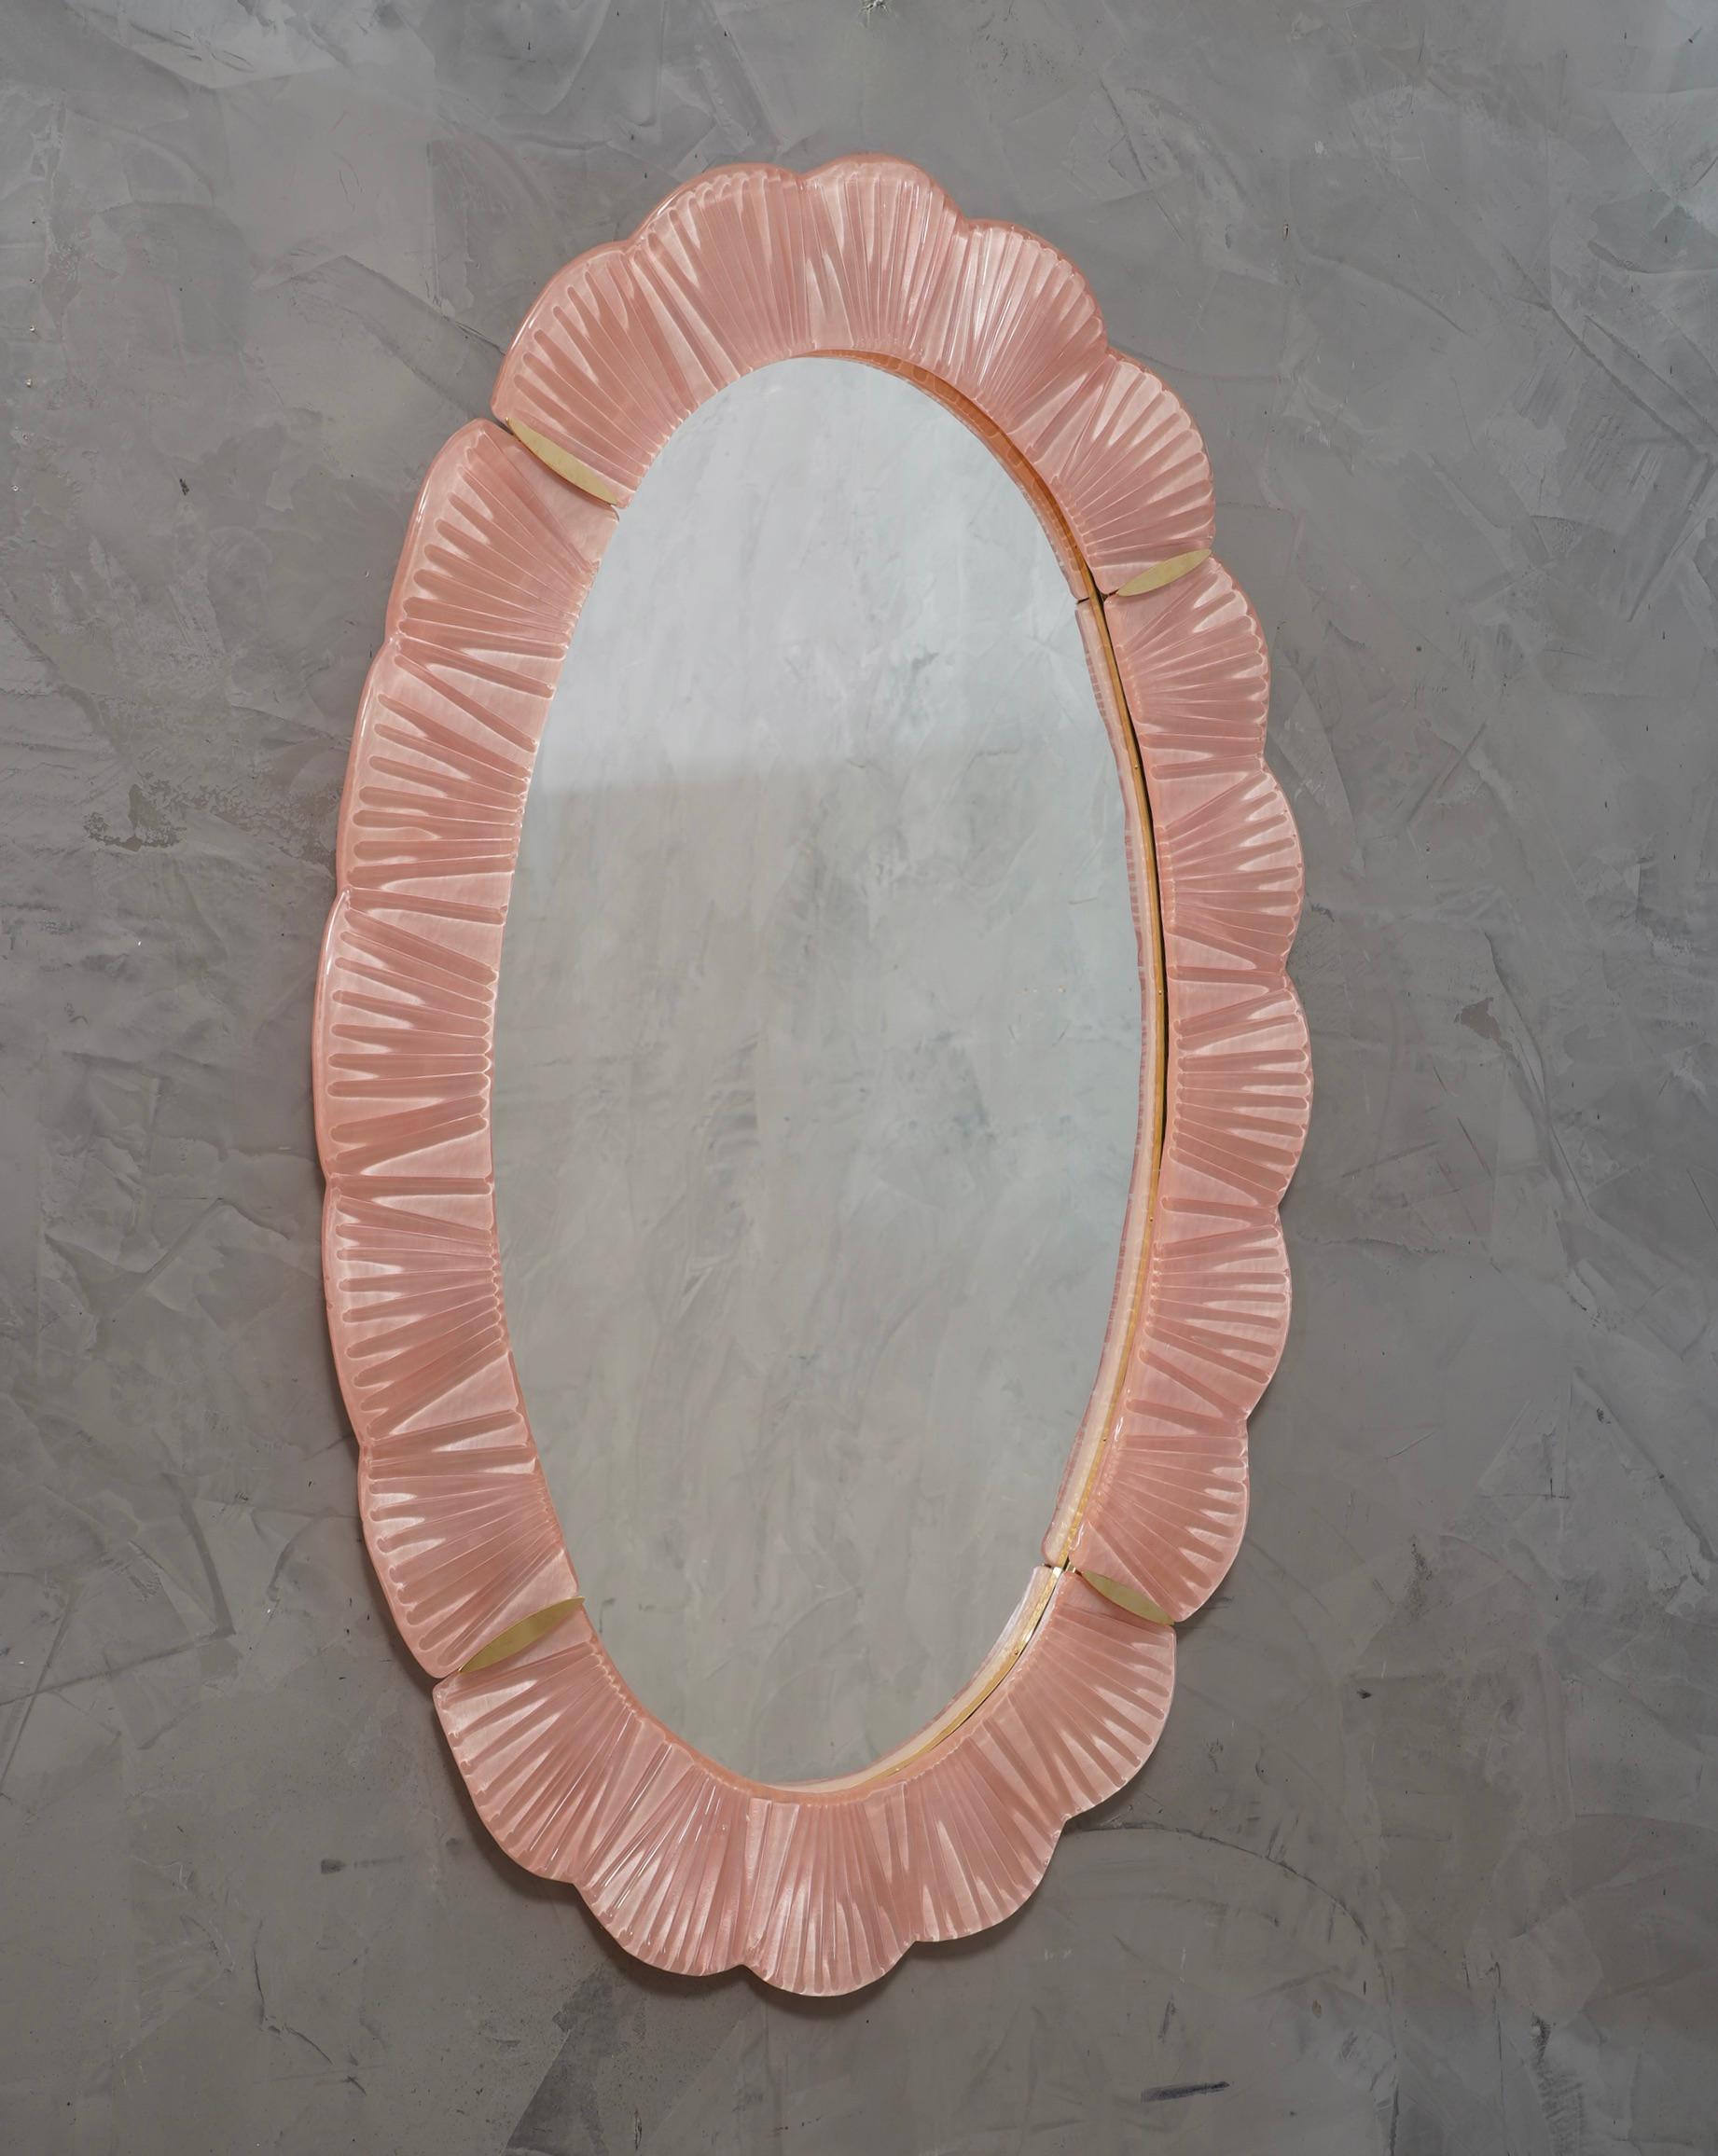 Stunning mirror in blazing pink color Murano glass, Venice. A mirror that alone will furnish your home environment.

The mirror has a rear structure in wood, on which four Murano glass sections are mounted to form an oval as in the photograph. The